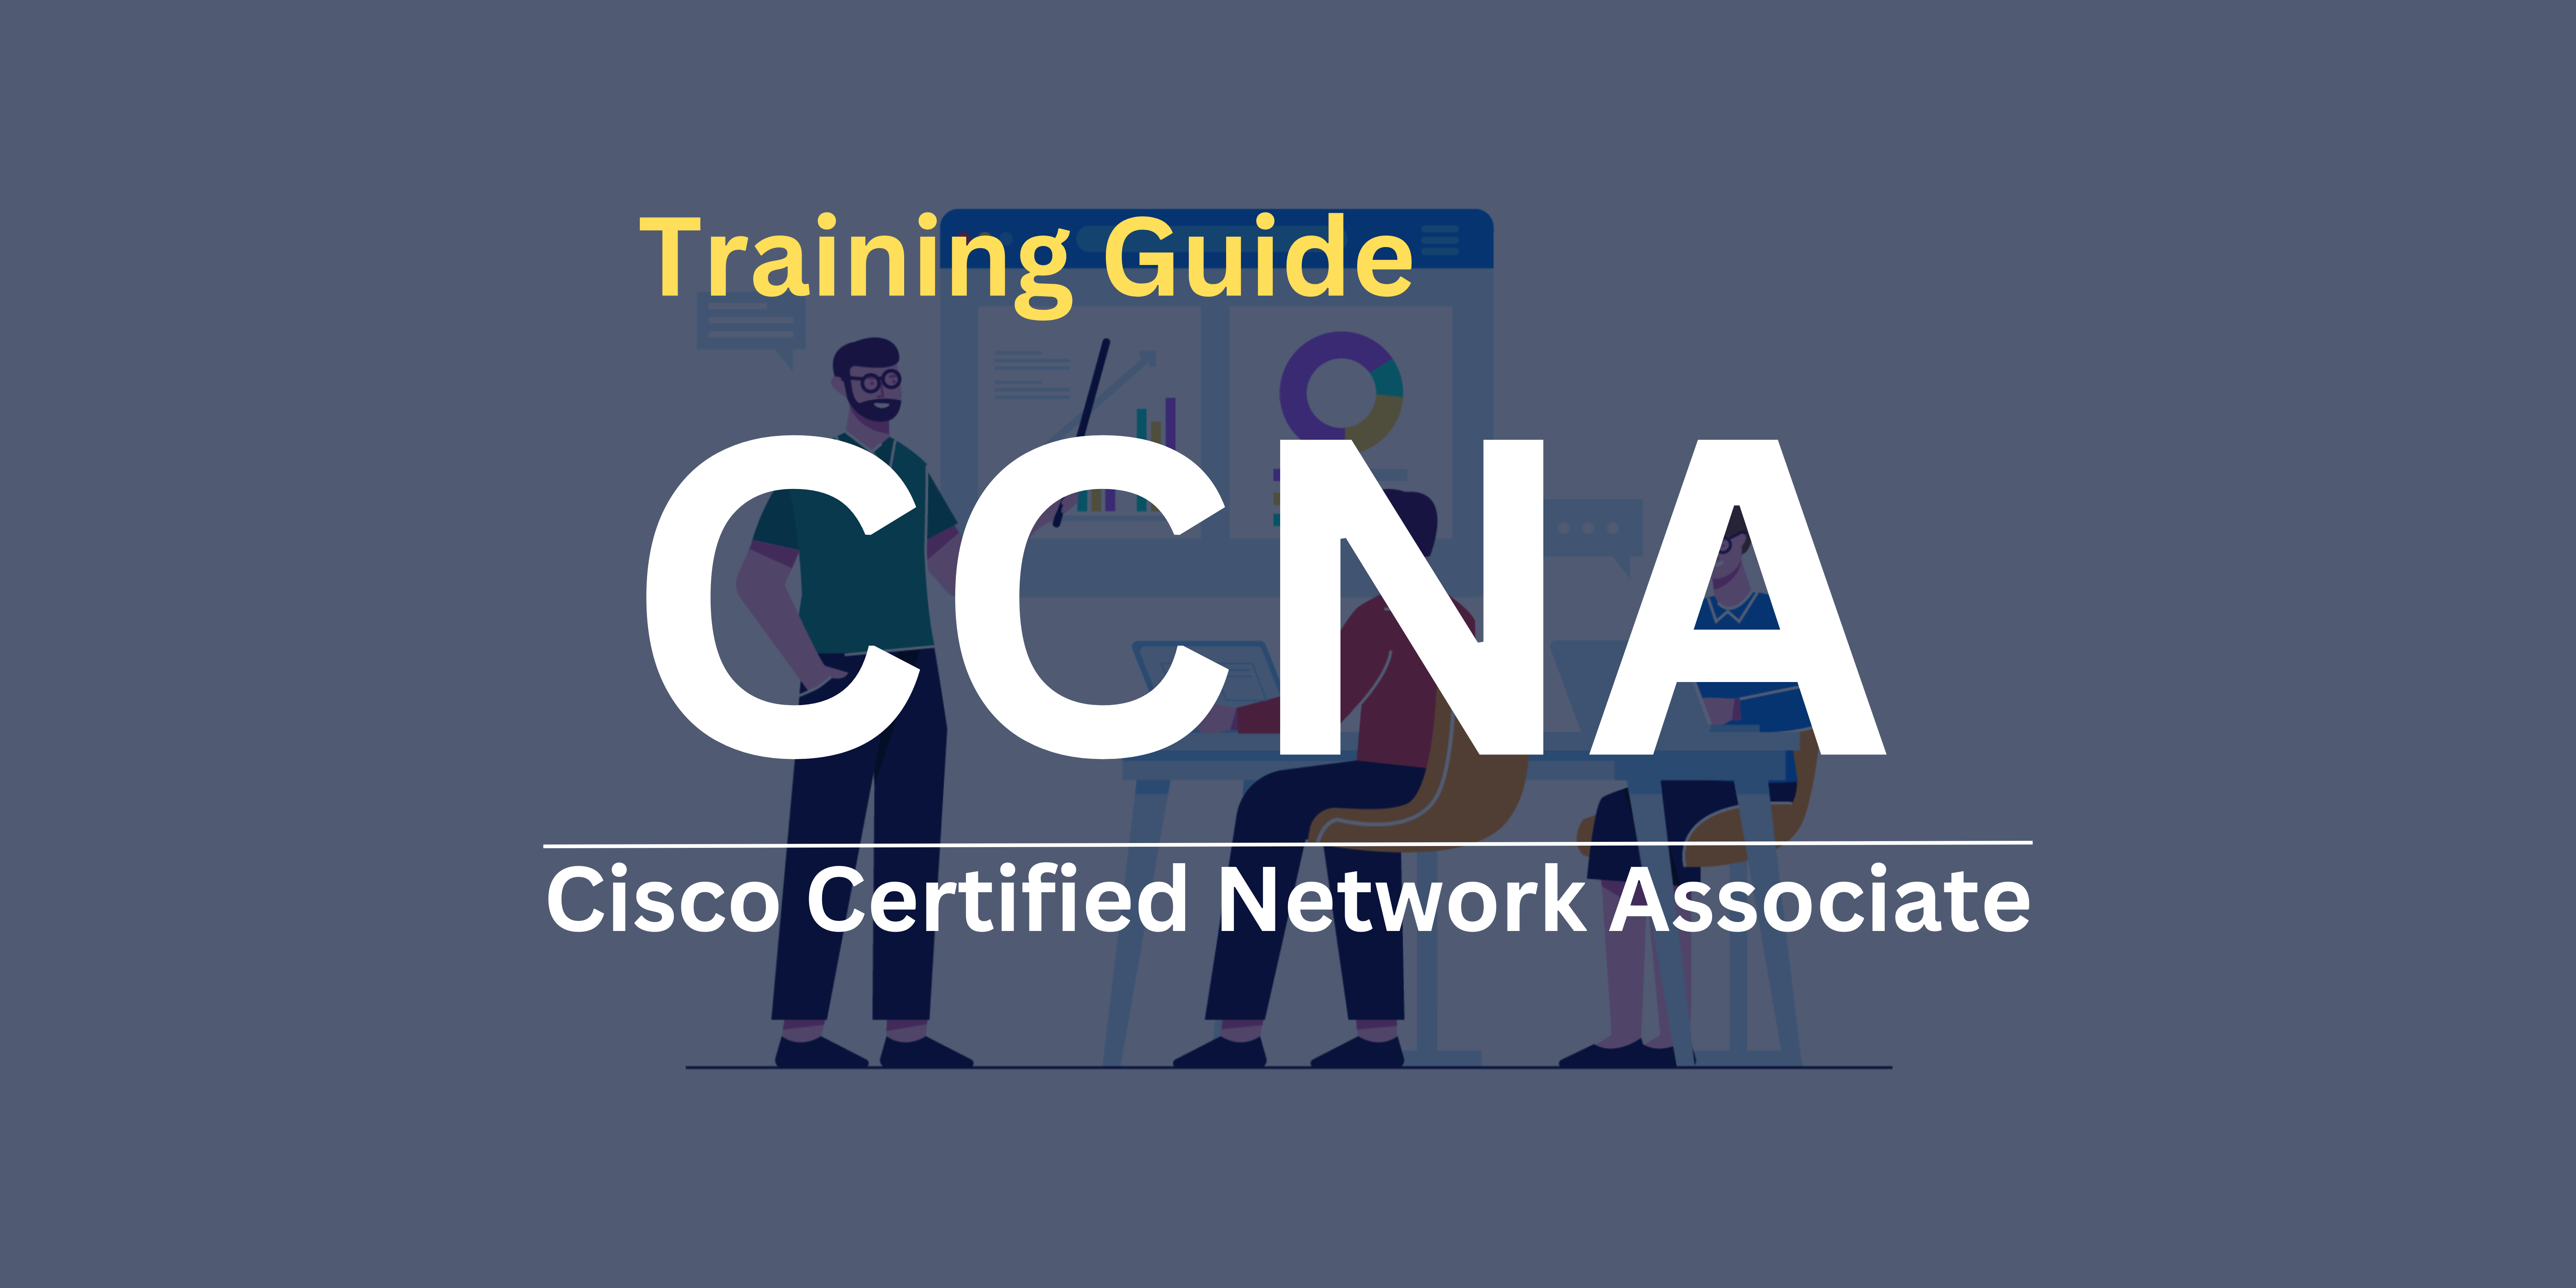 CCNA Certification Training Guide